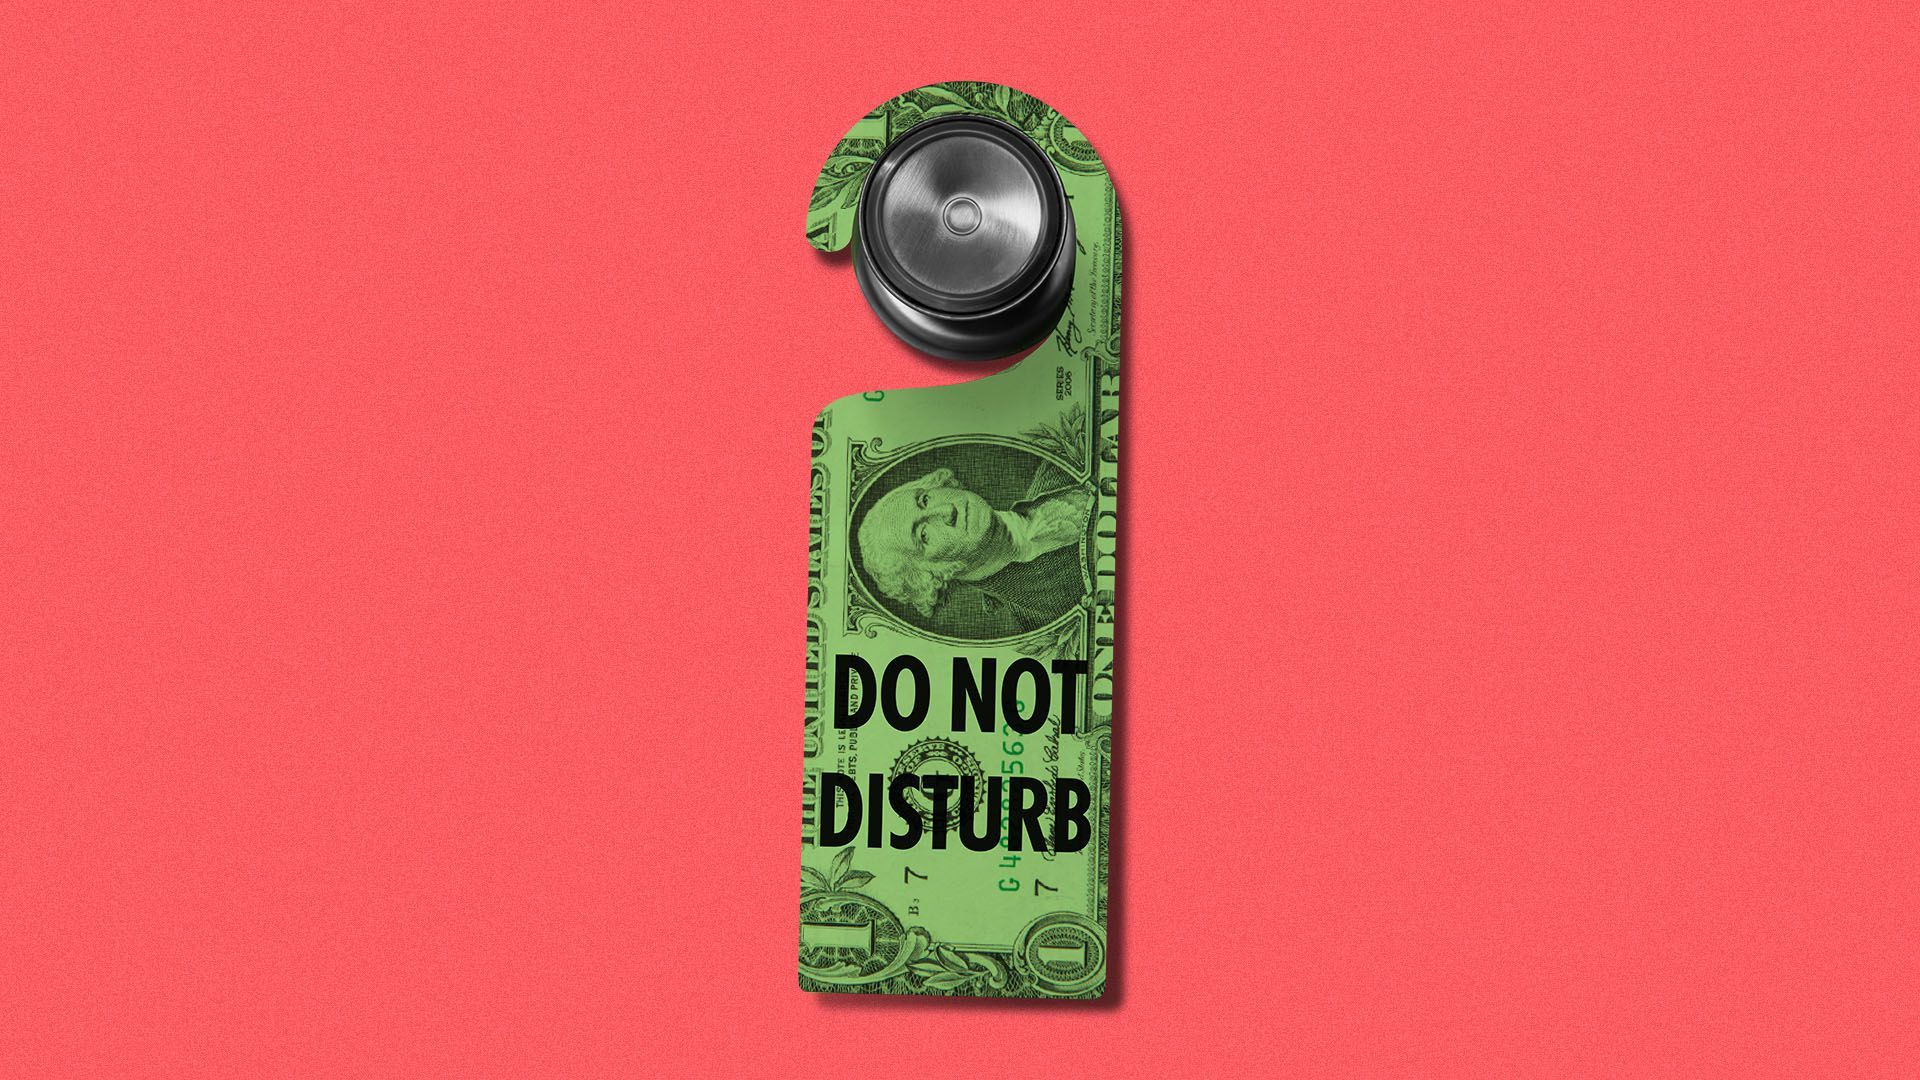 Illustration of a "do not disturb" sign on a door